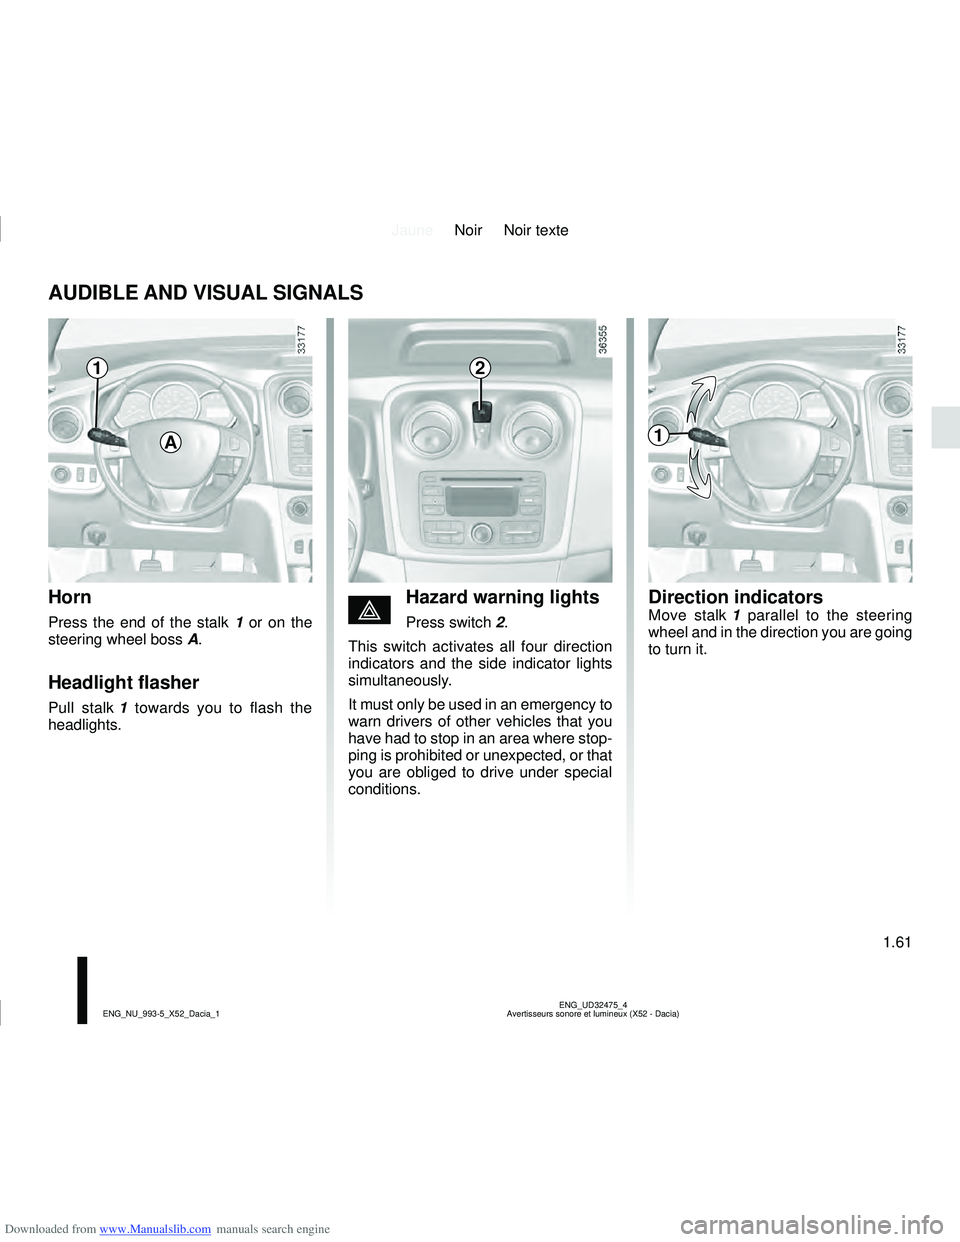 DACIA LOGAN 2011  Owners Manual Downloaded from www.Manualslib.com manuals search engine JauneNoir Noir texte
1.61
ENG_UD32475_4
Avertisseurs sonore et lumineux (X52 - Dacia)
ENG_NU_993-5_X52_Dacia_1
AUDIBLE AND VISUAL SIGNALS
Horn
